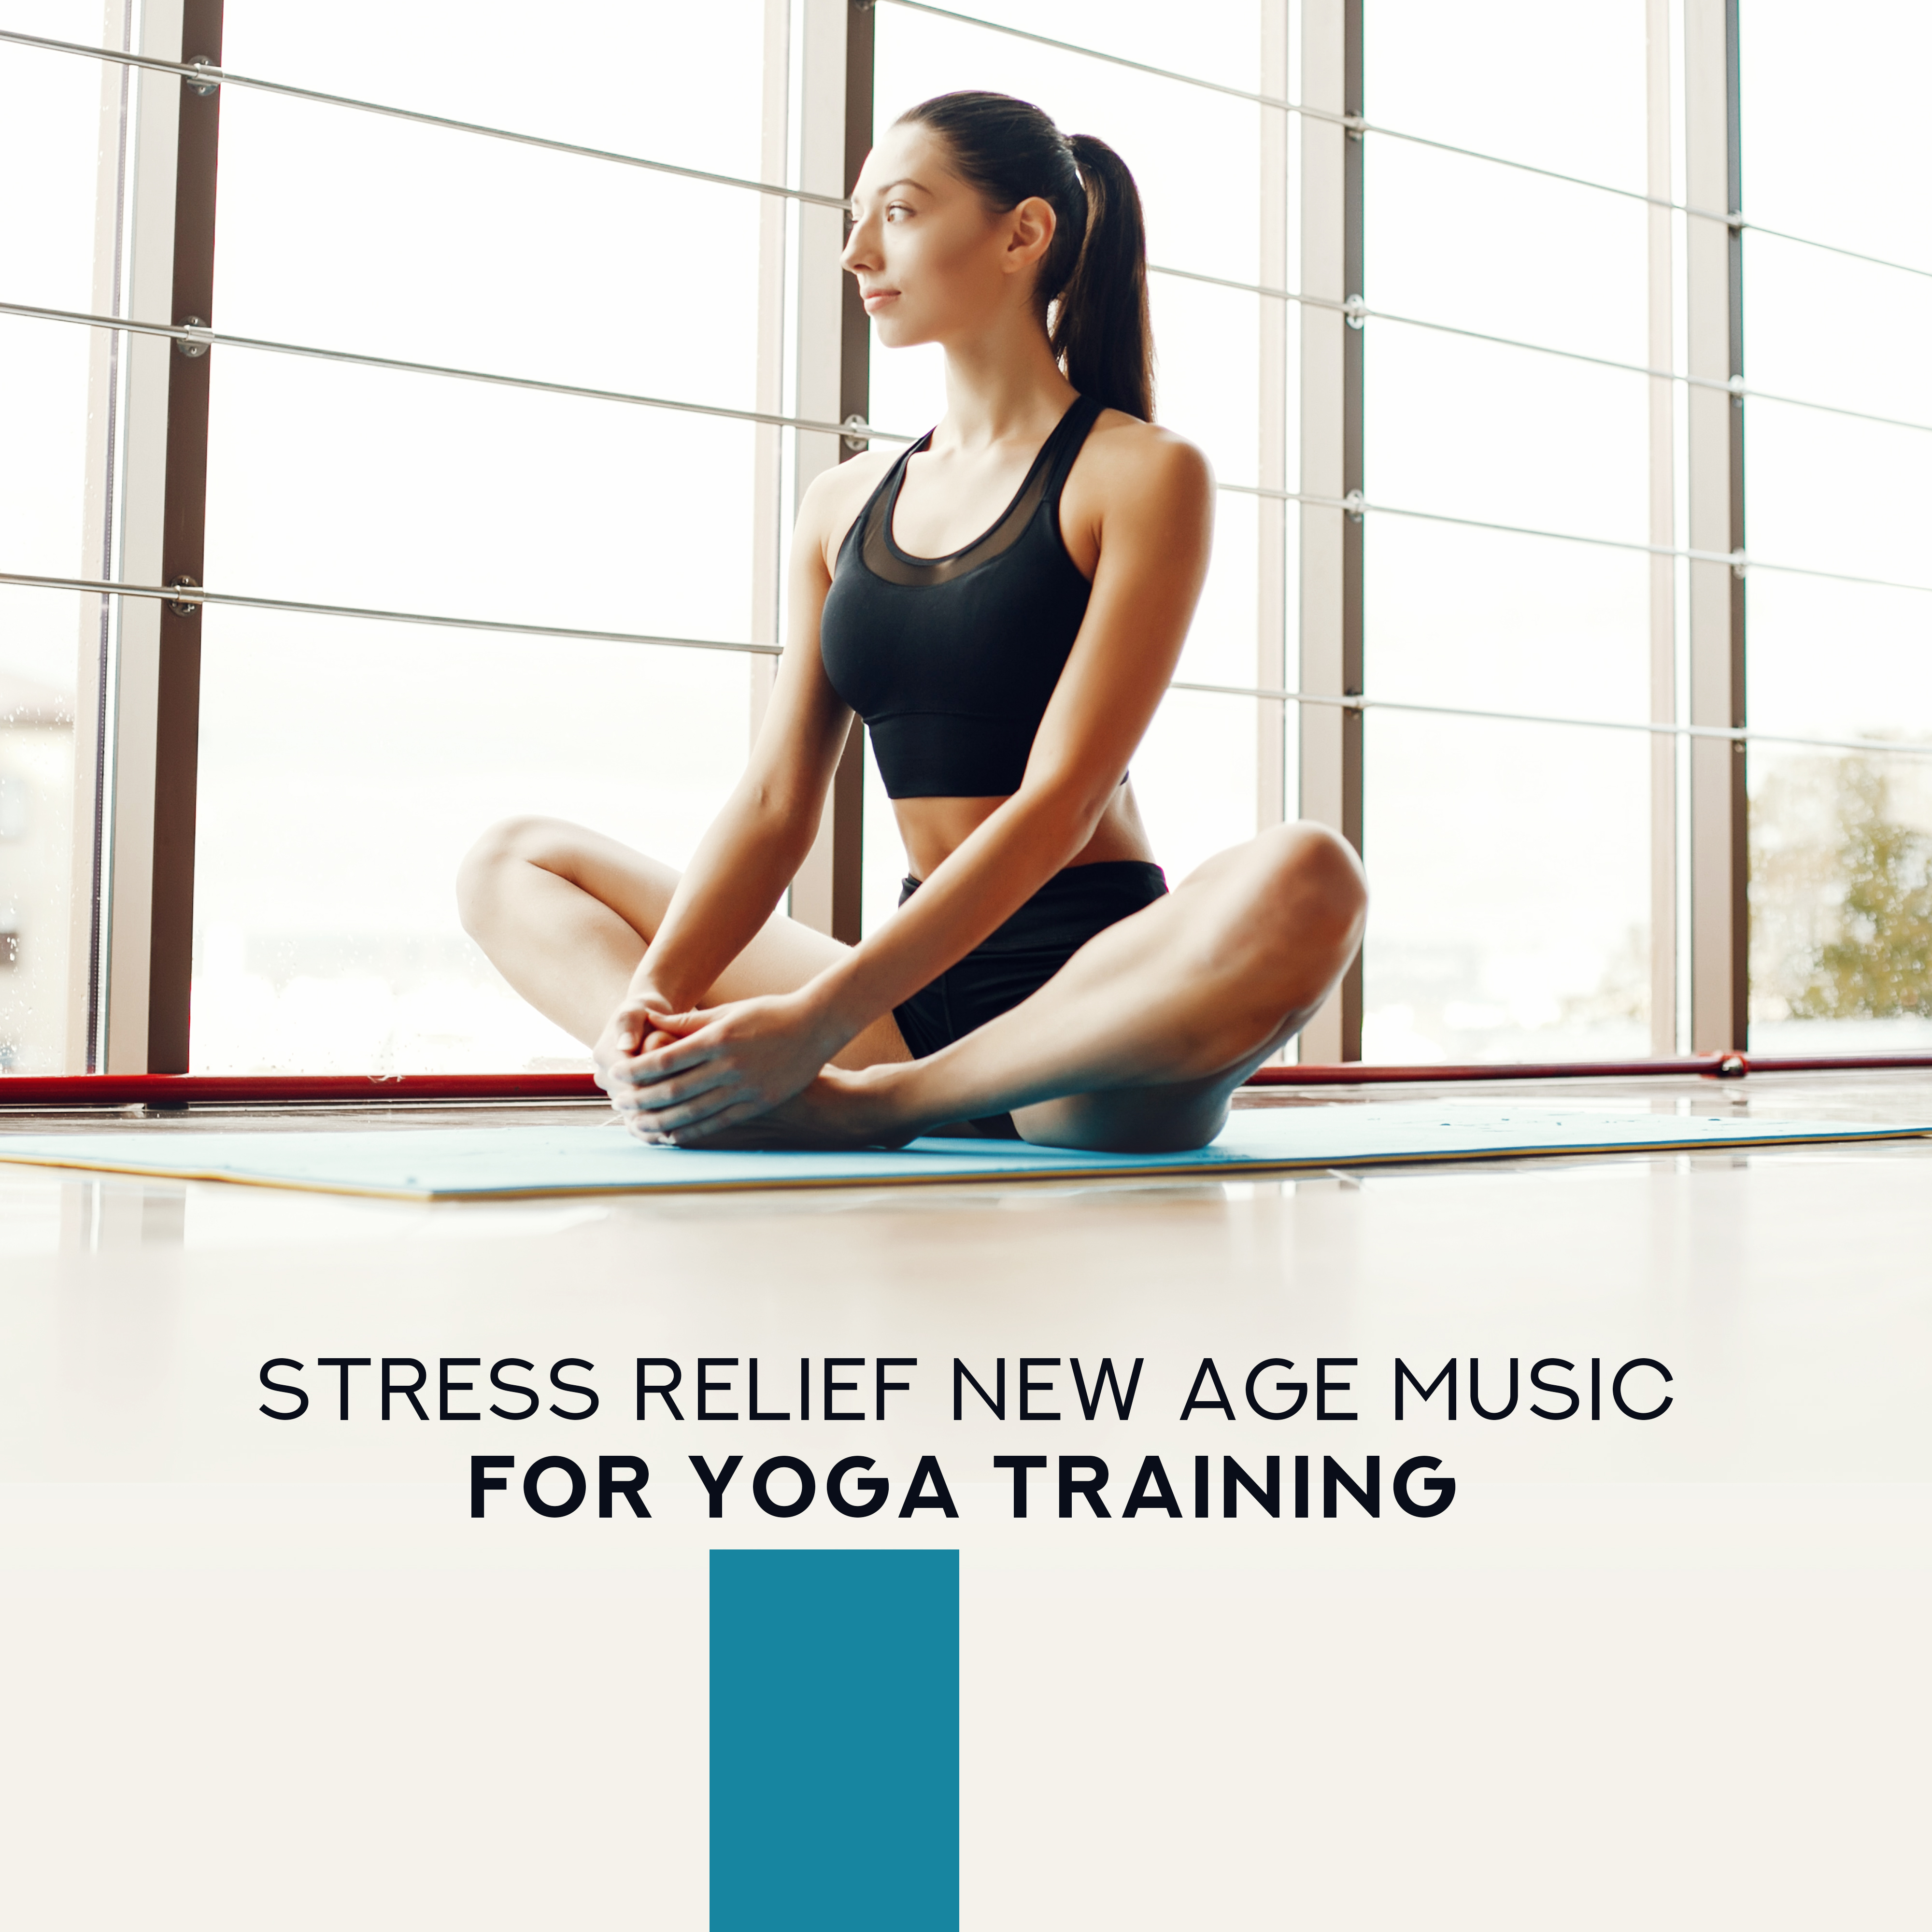 Stress Relief New Age Music for Yoga Training